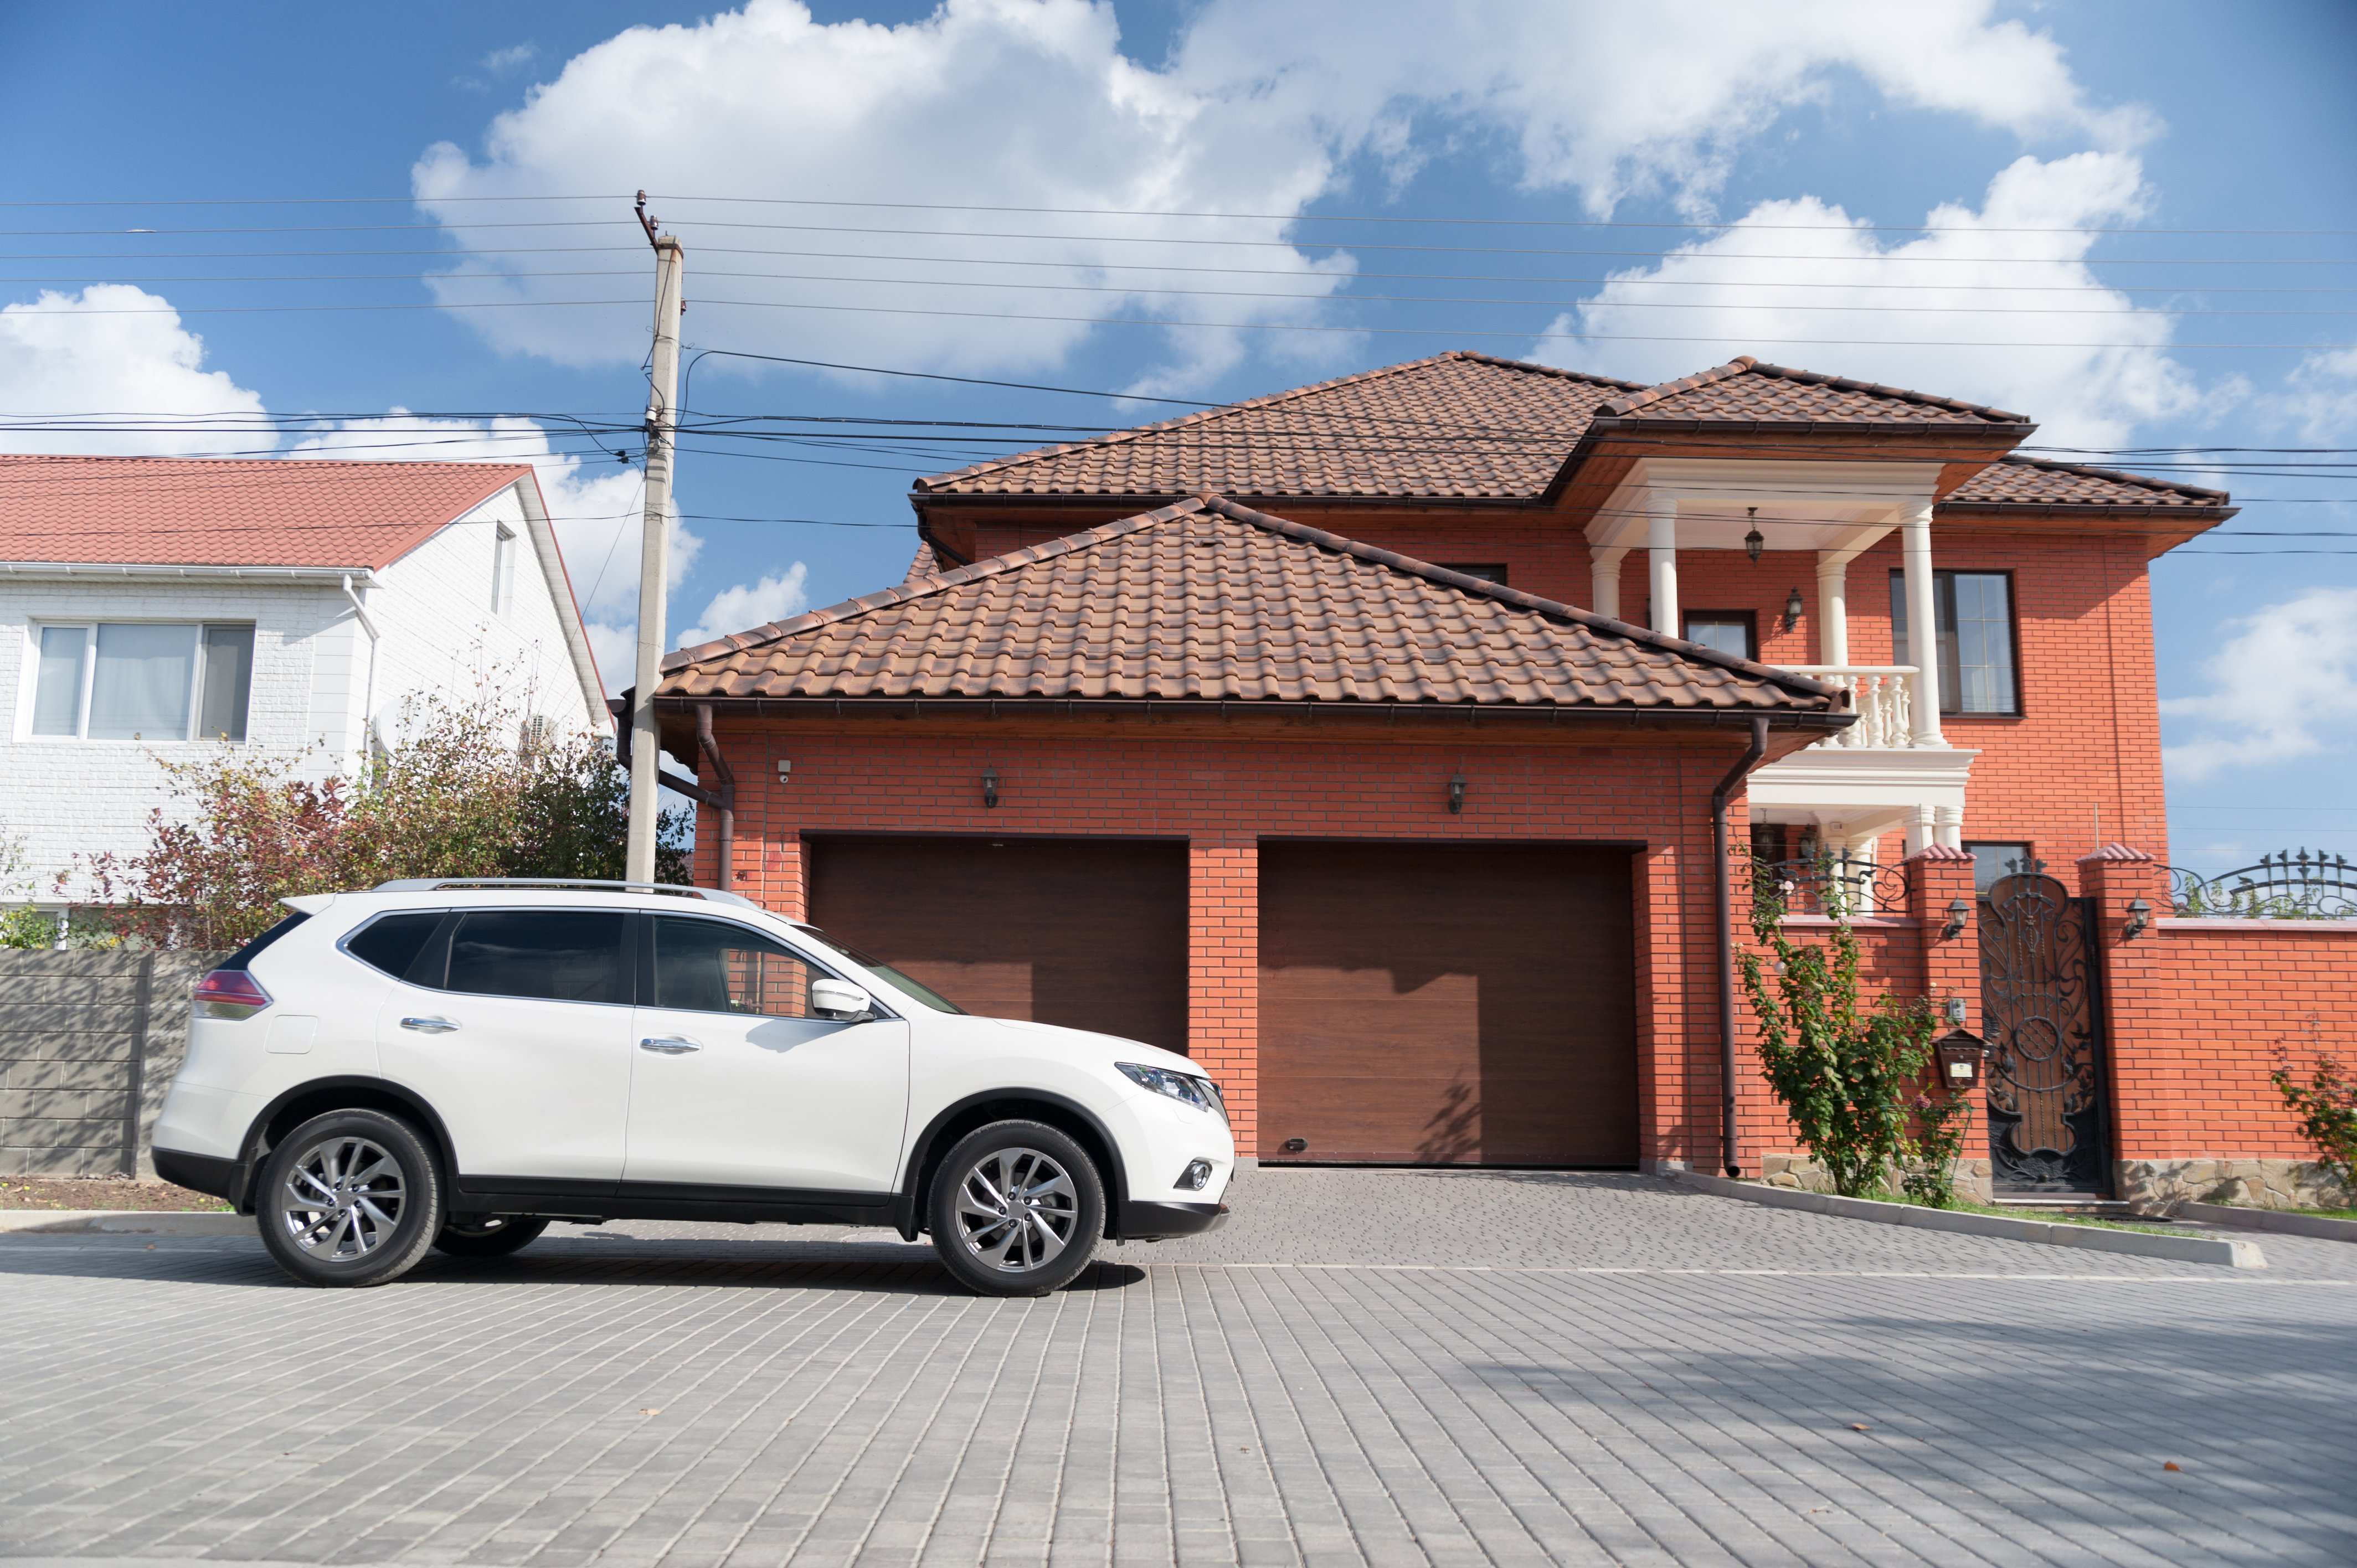 The vehicle is near the house | Source: Shutterstock